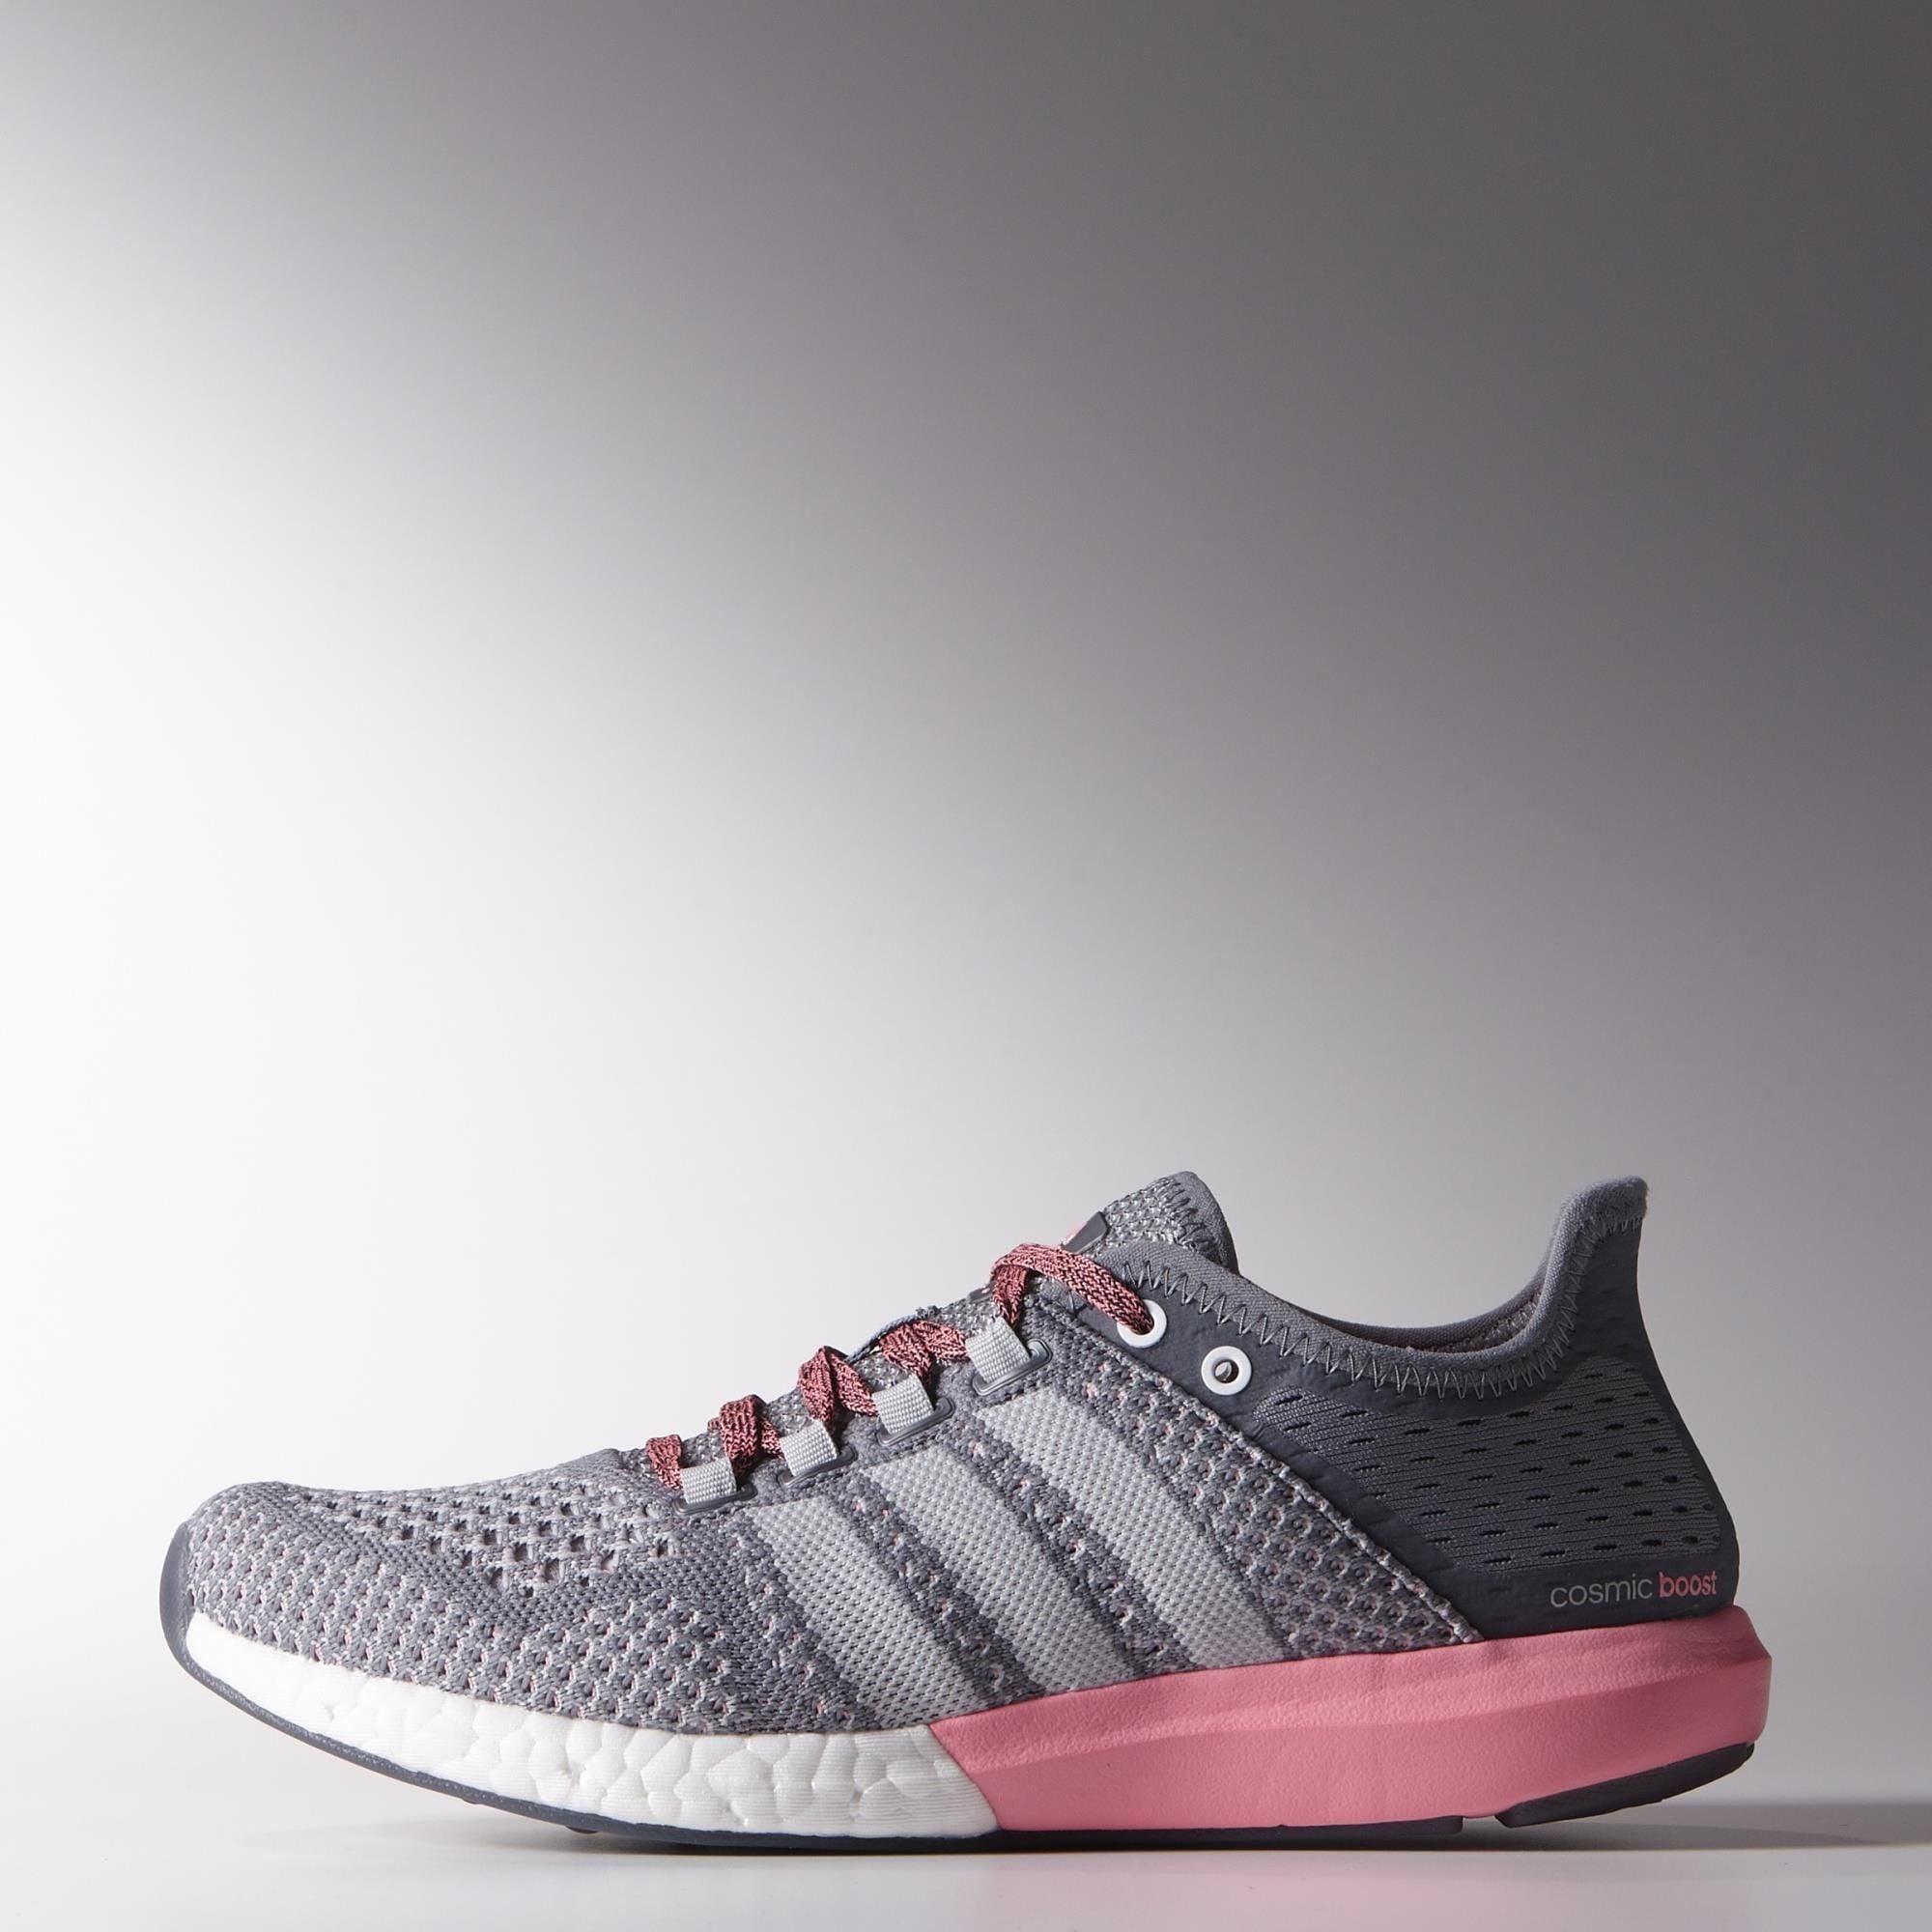 Adidas Climachill Cosmic Boost 10 of Favorite Running Shoes For | POPSUGAR Fitness 11